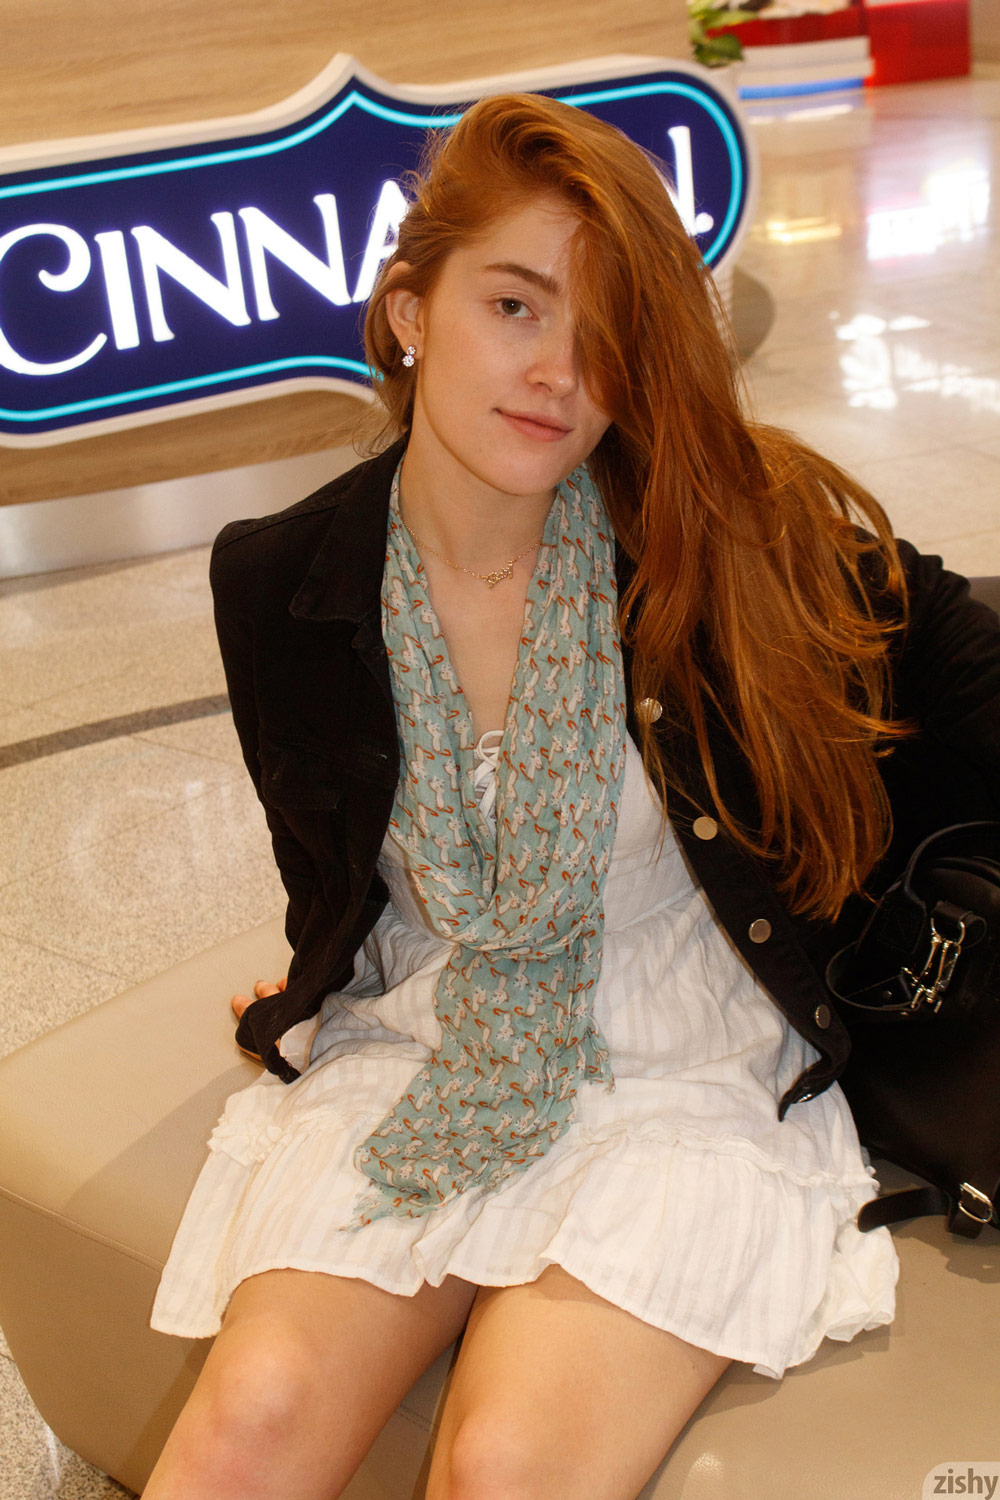 Jia Lissa in a Skirt